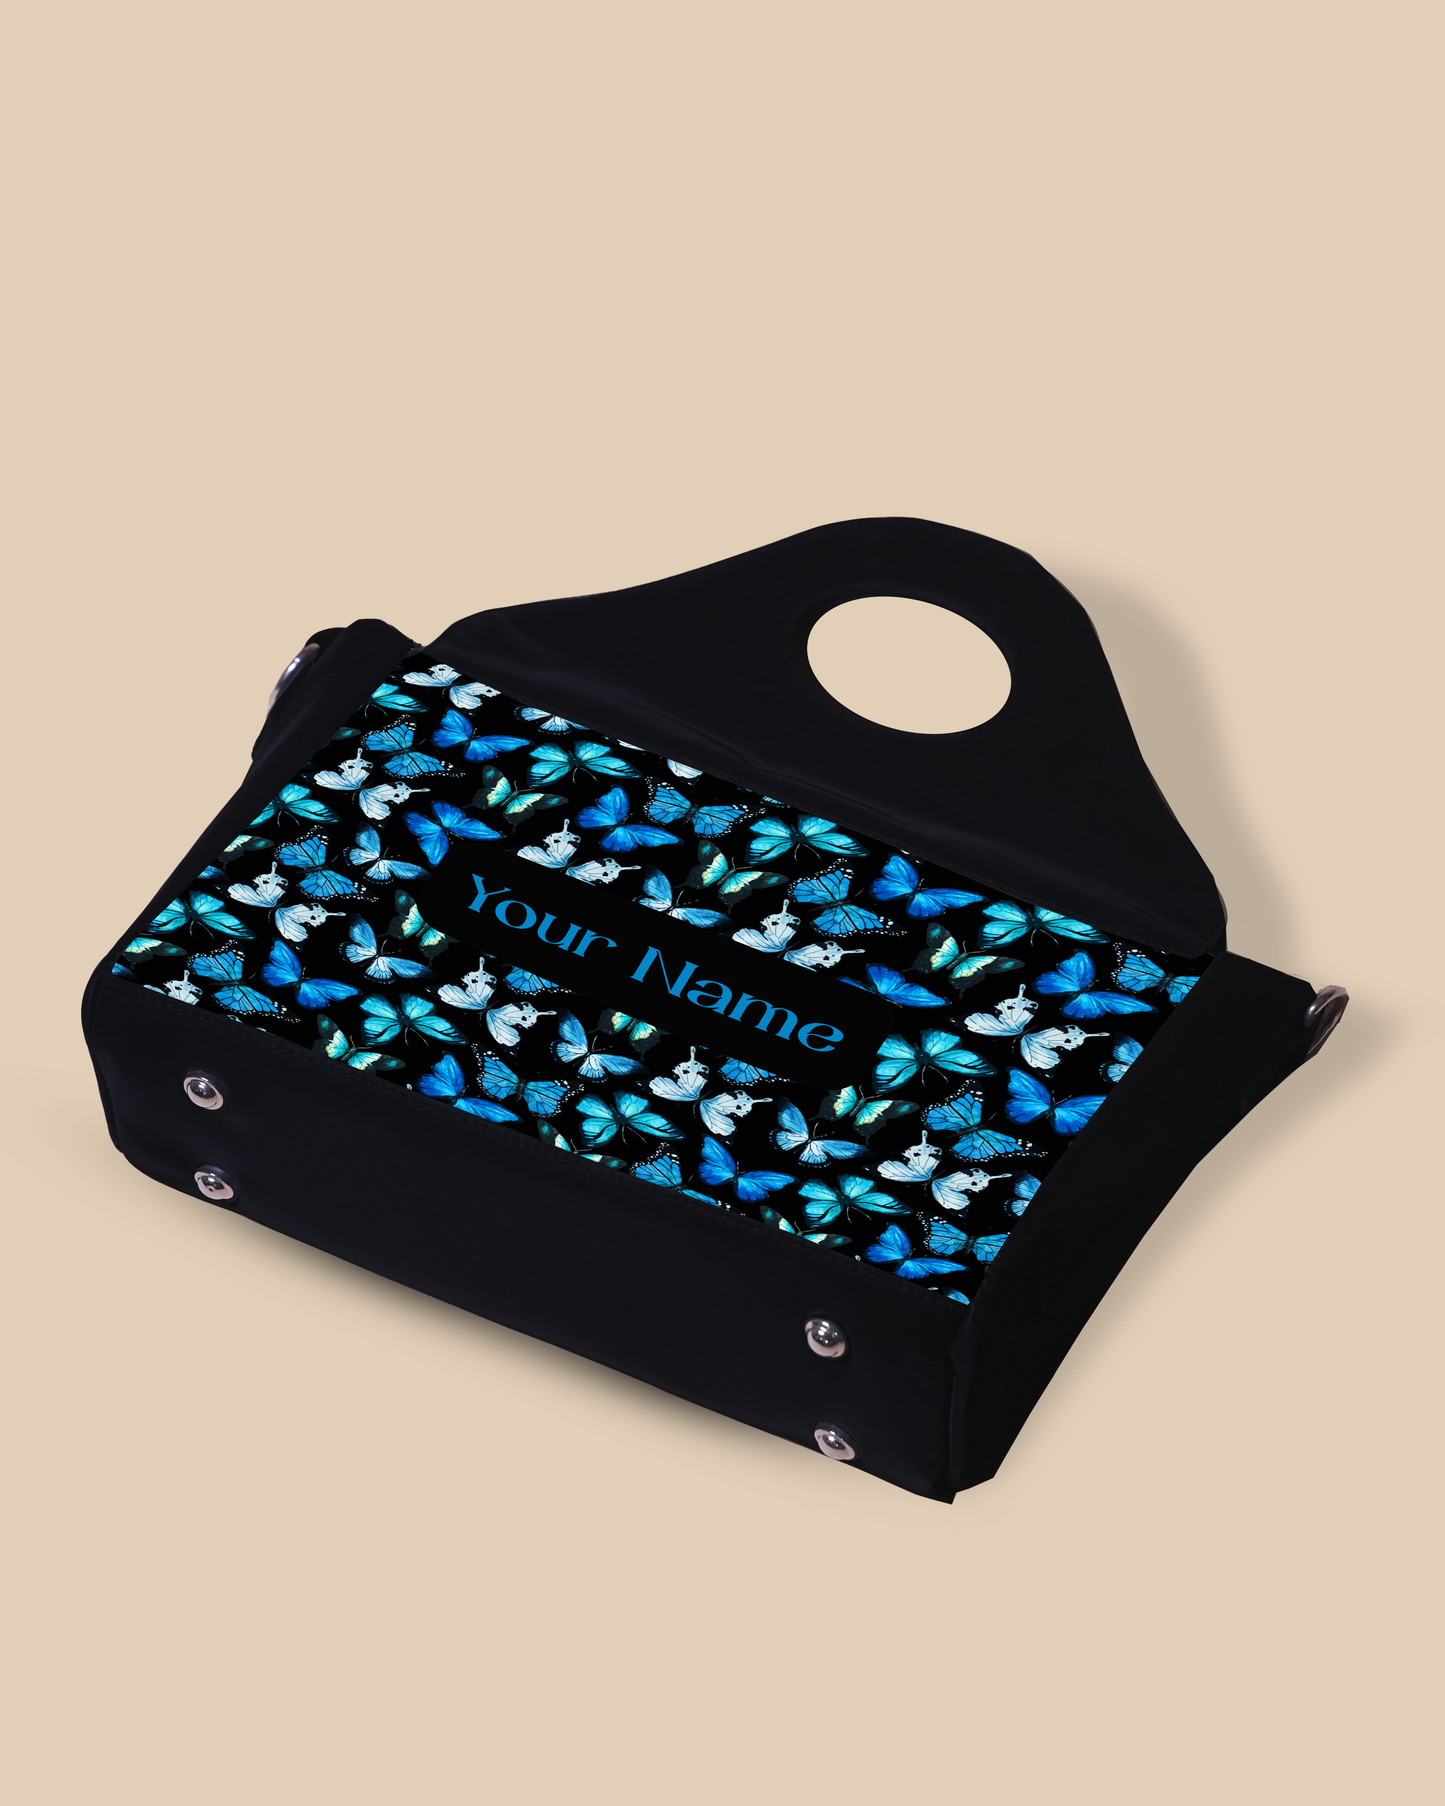 Customized Sling Purse Designed With Blue Flying Butterflies